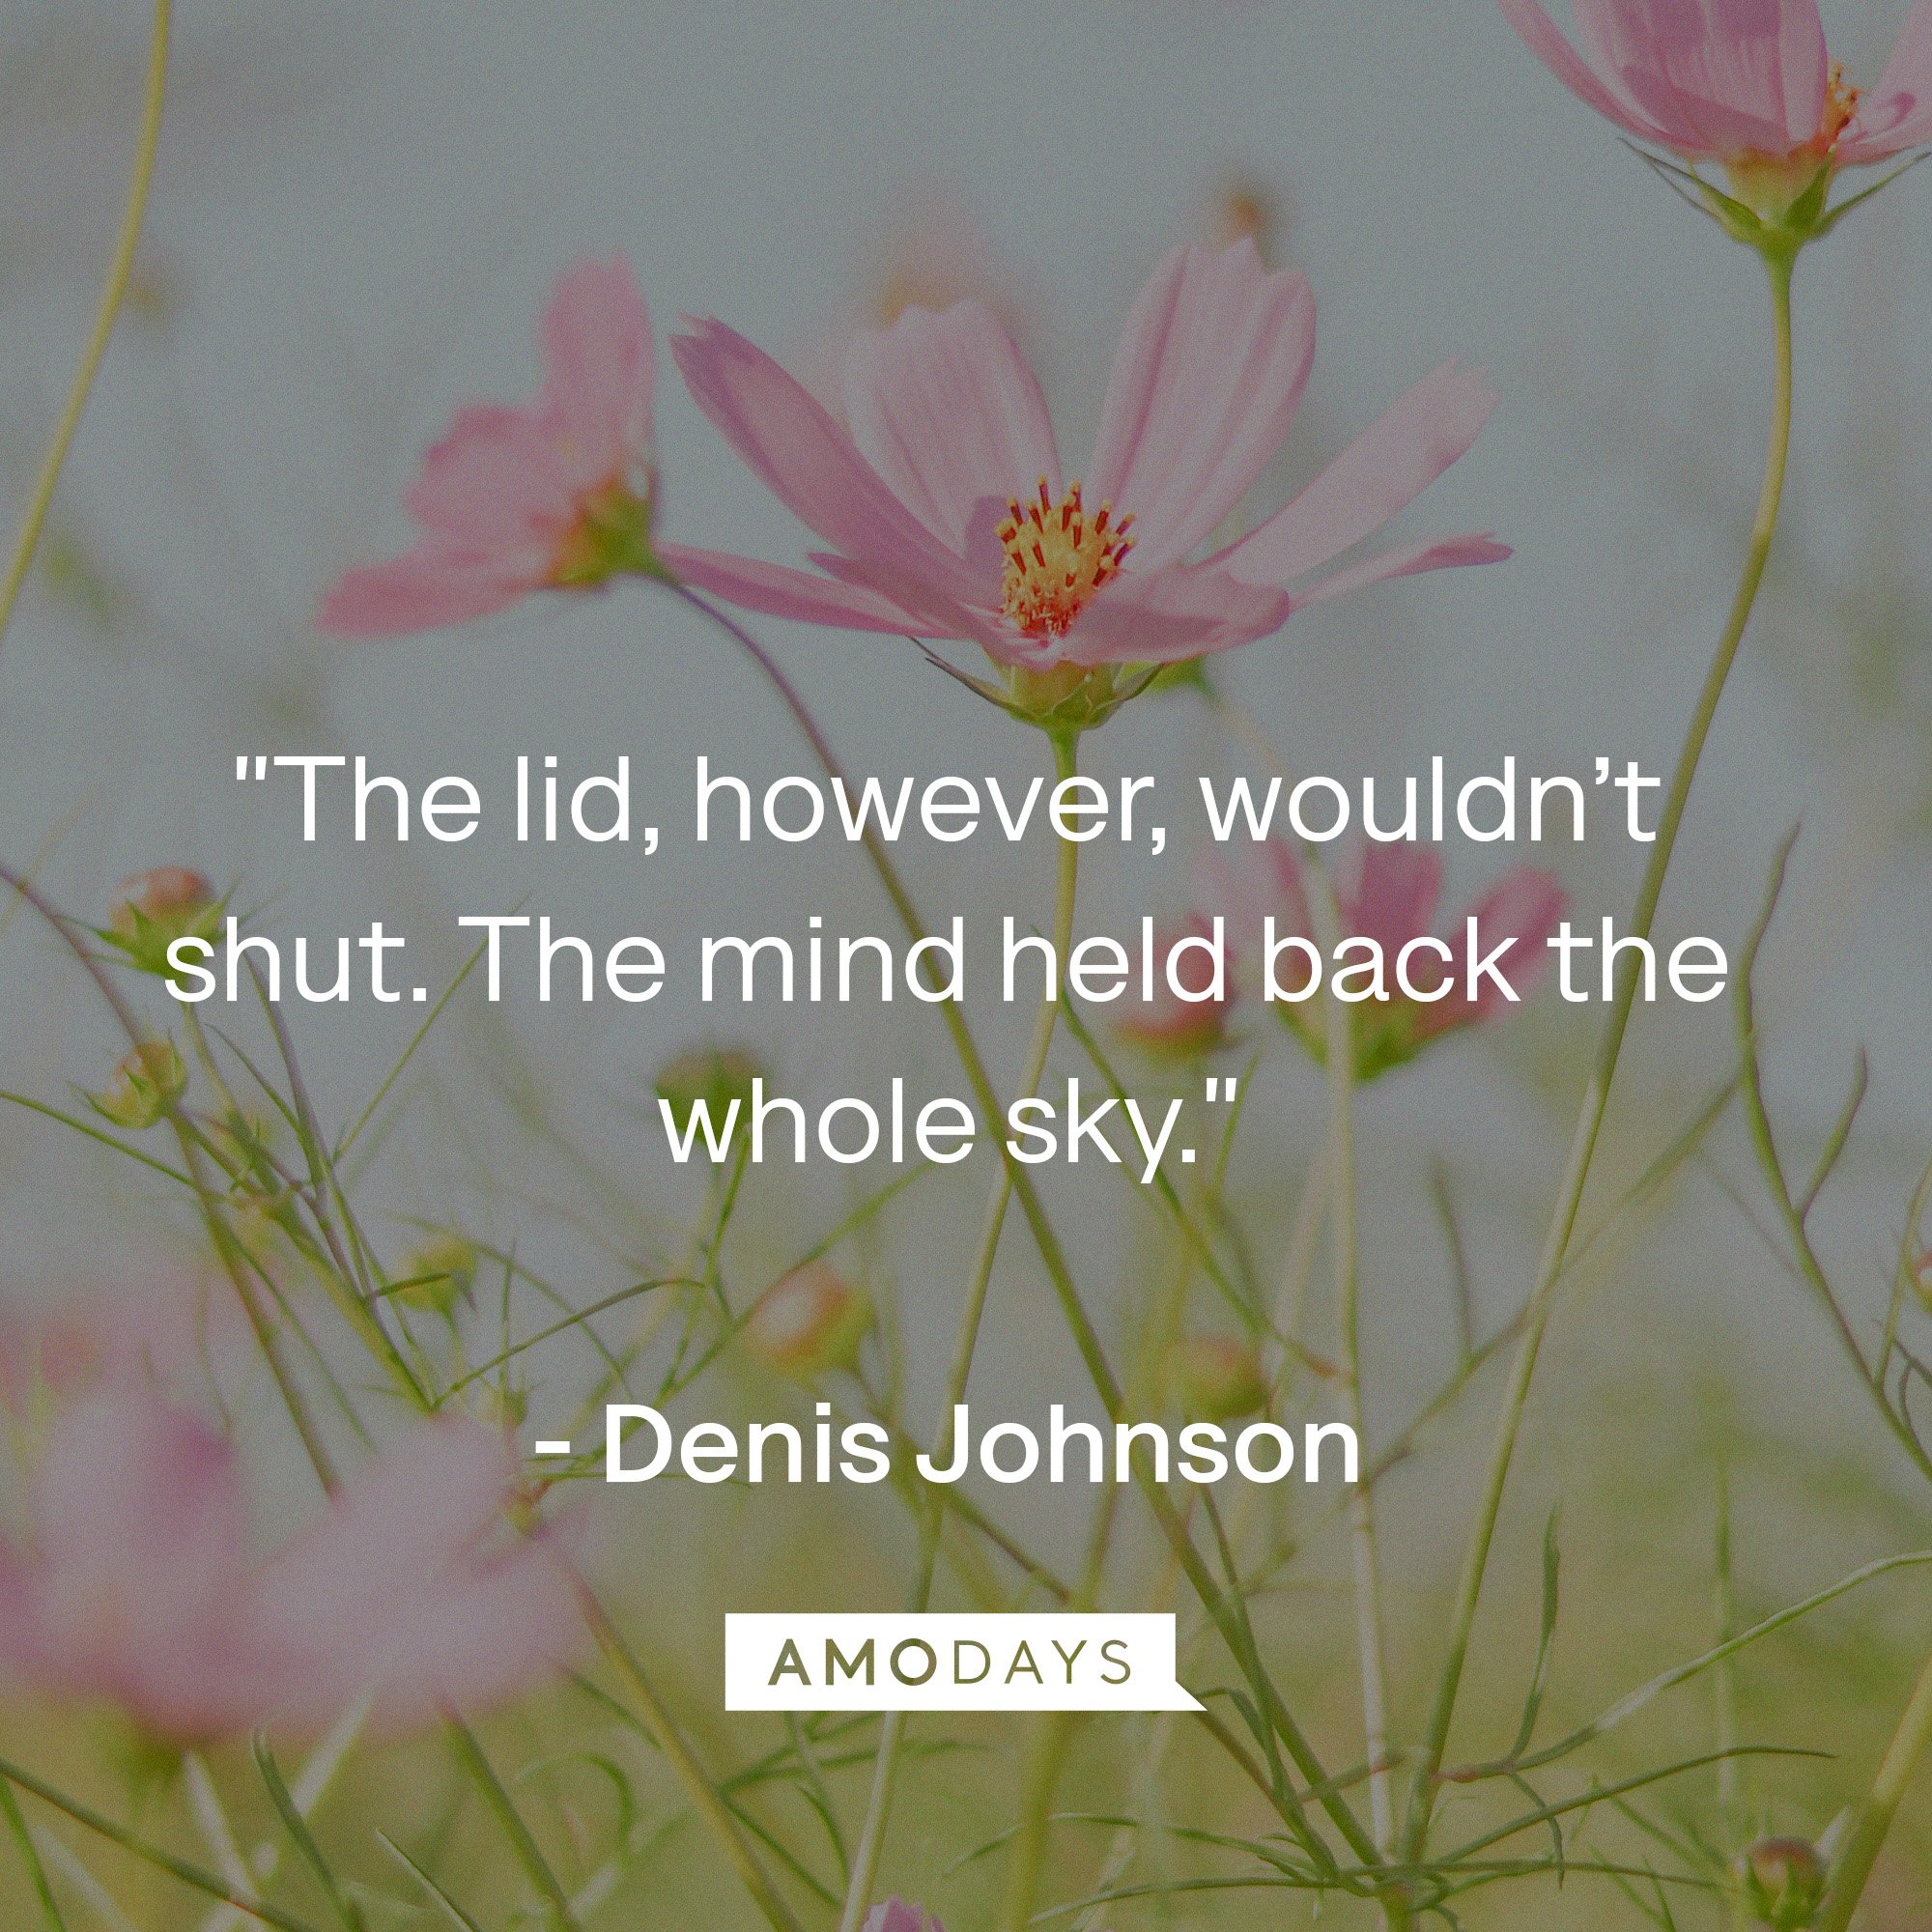 Denis Johnson's quote: "The lid, however, wouldn't shut. The mind held back the whole sky."  | Image: AmoDays